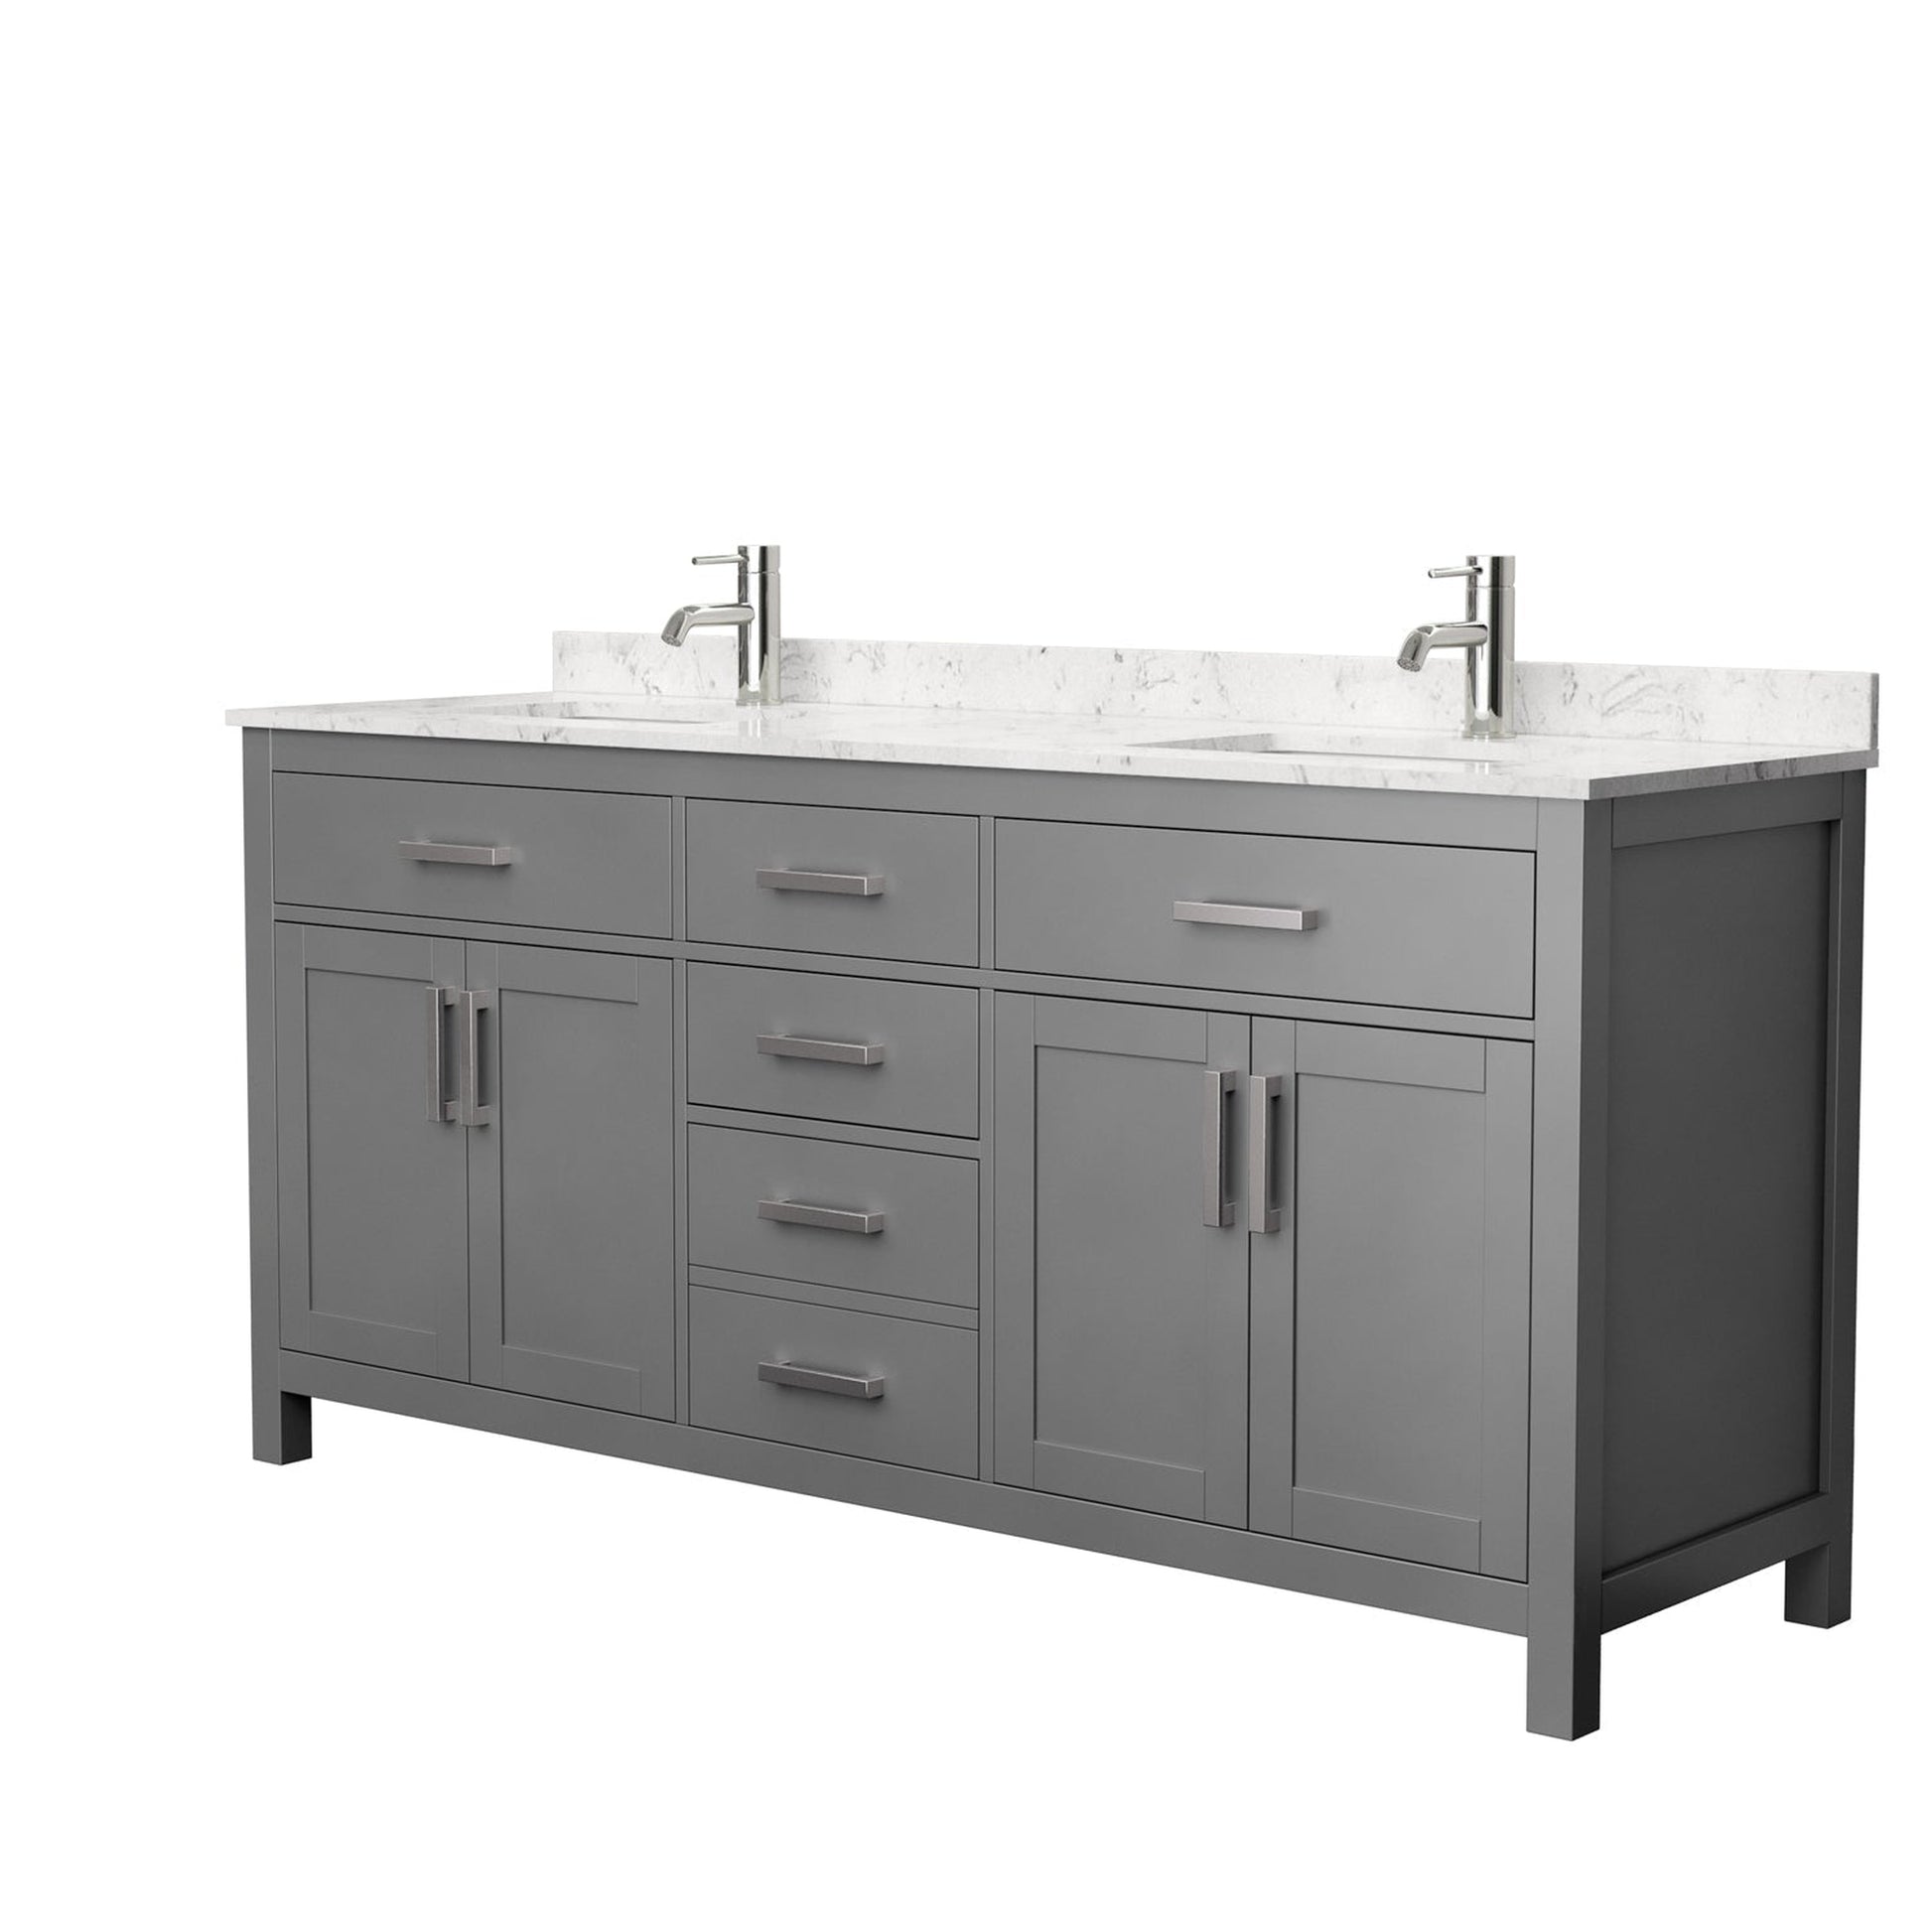 Wyndham Collection Beckett 72" Double Bathroom Dark Gray Vanity With White Carrara Cultured Marble Countertop, Undermount Square Sink And Brushed Nickel Trim